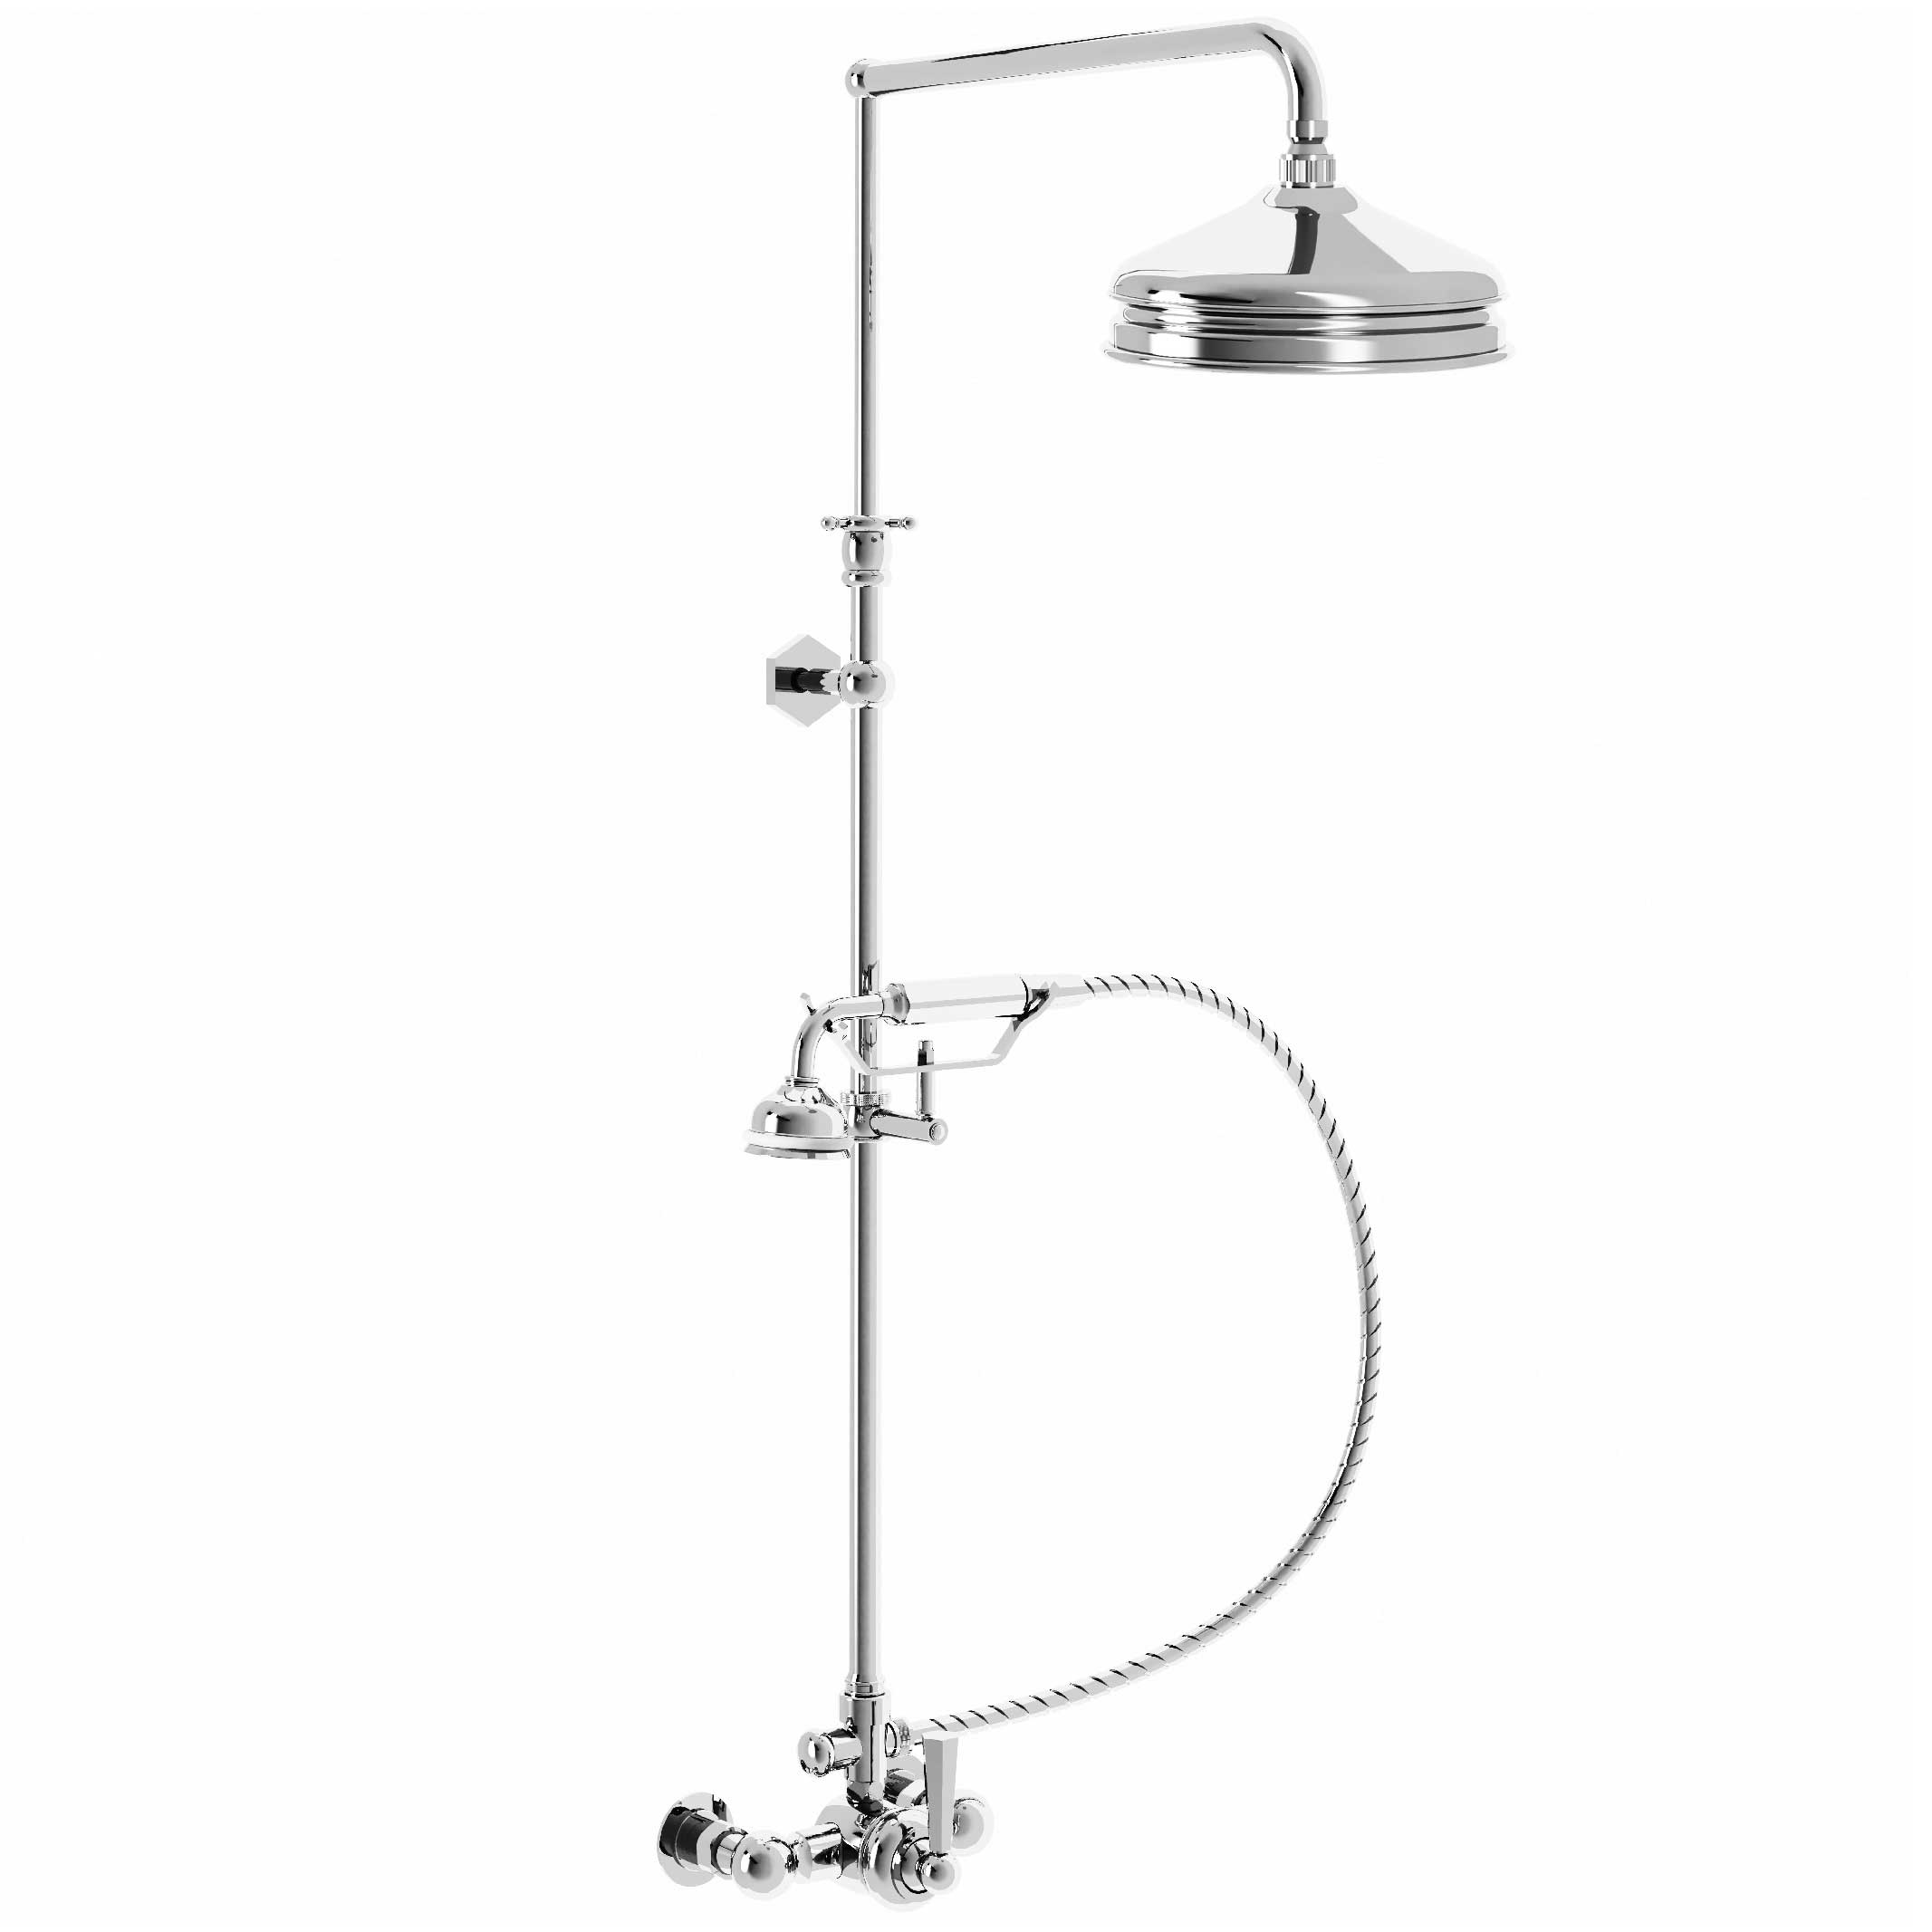 M39-2204M Single-lever shower mixer with column, anti-scaling